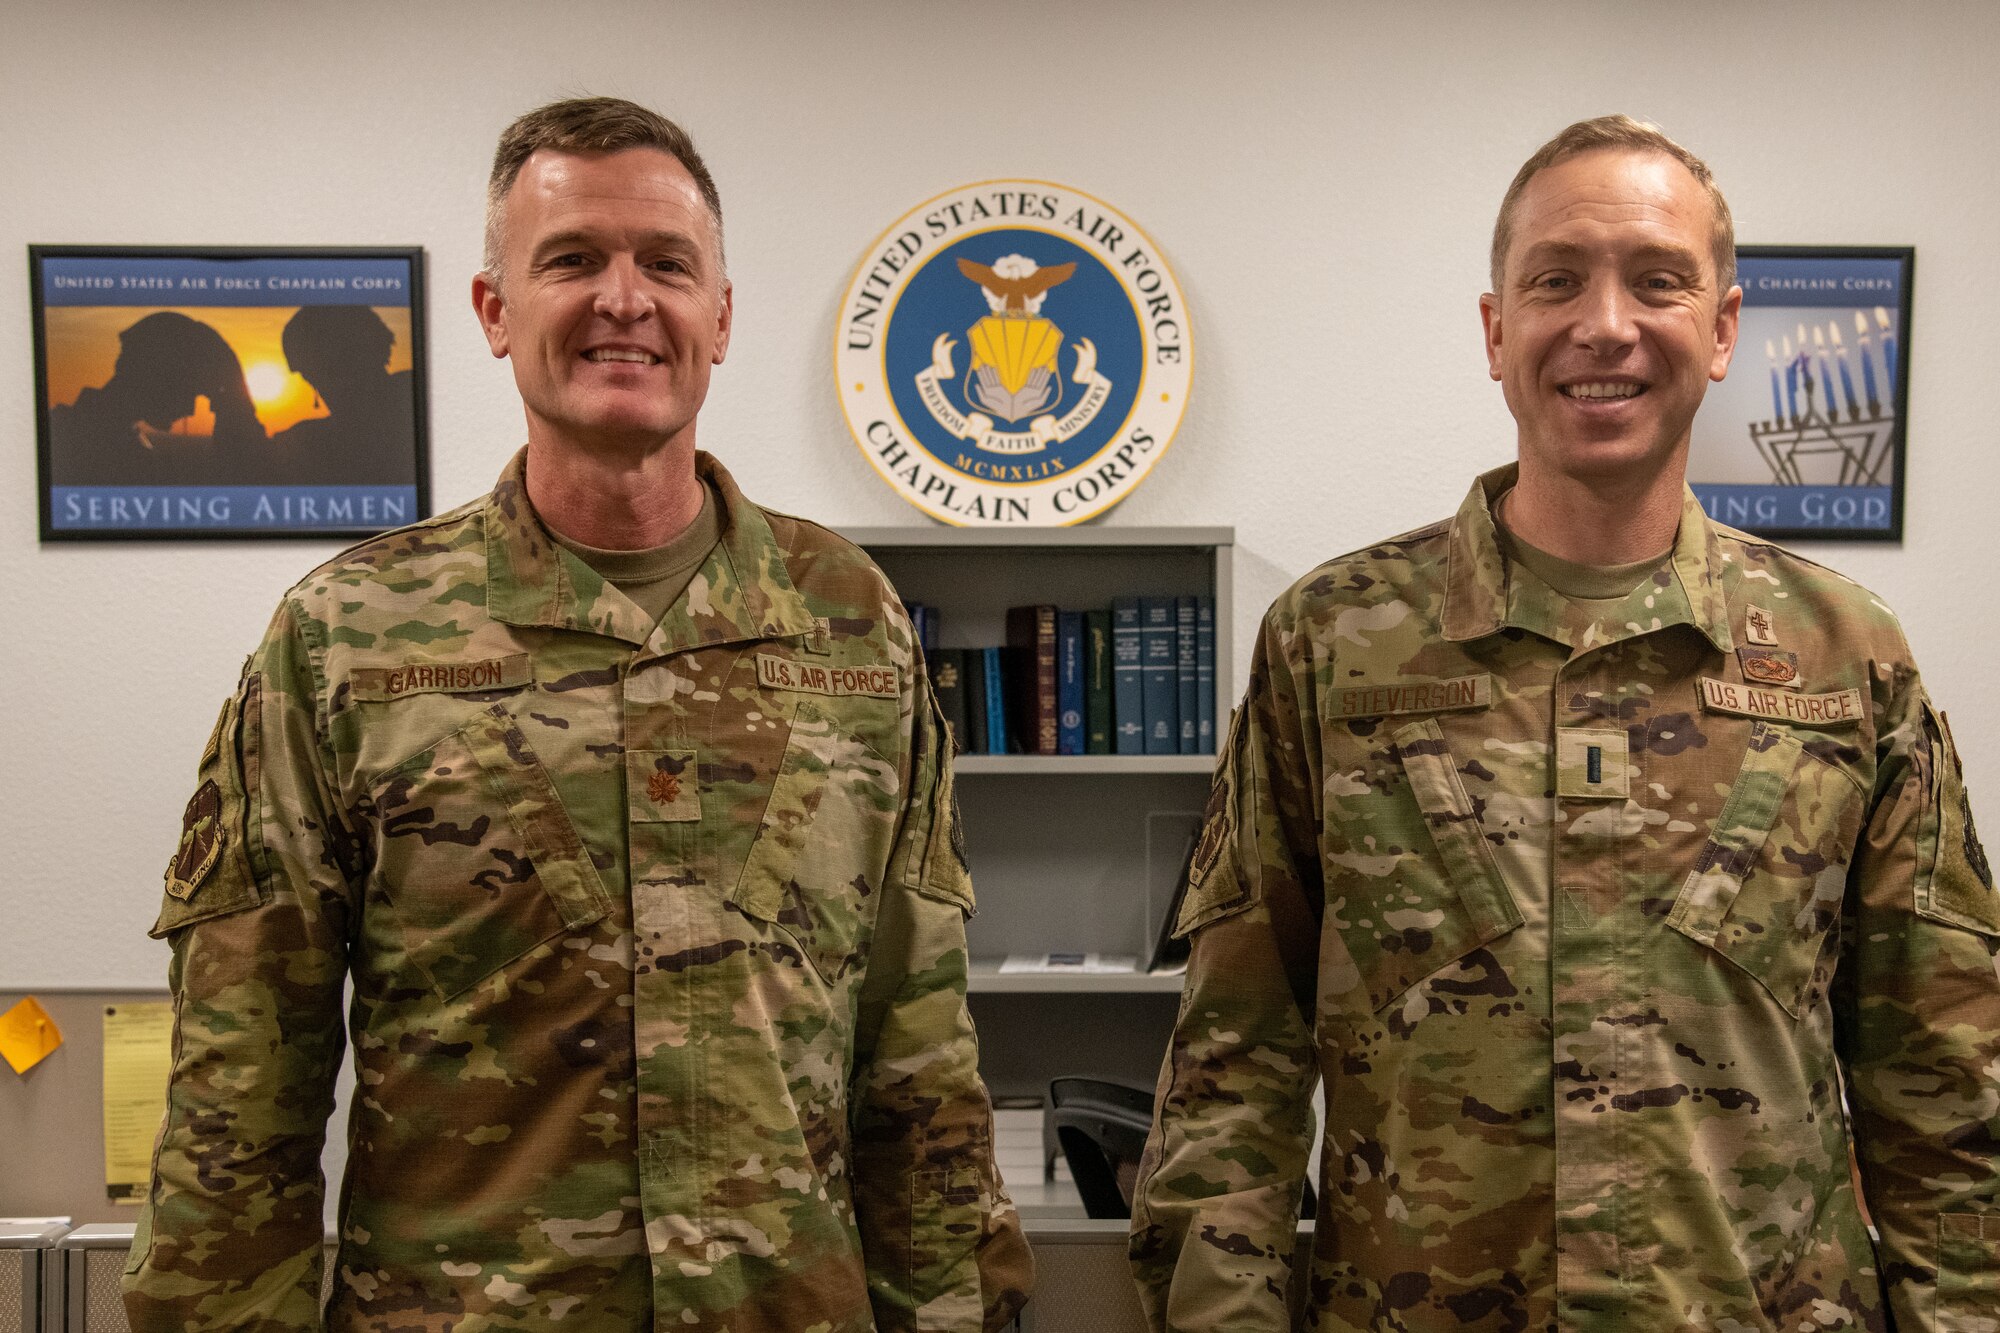 Chaplain Garrison and Chaplain Steverson stand in front of their office